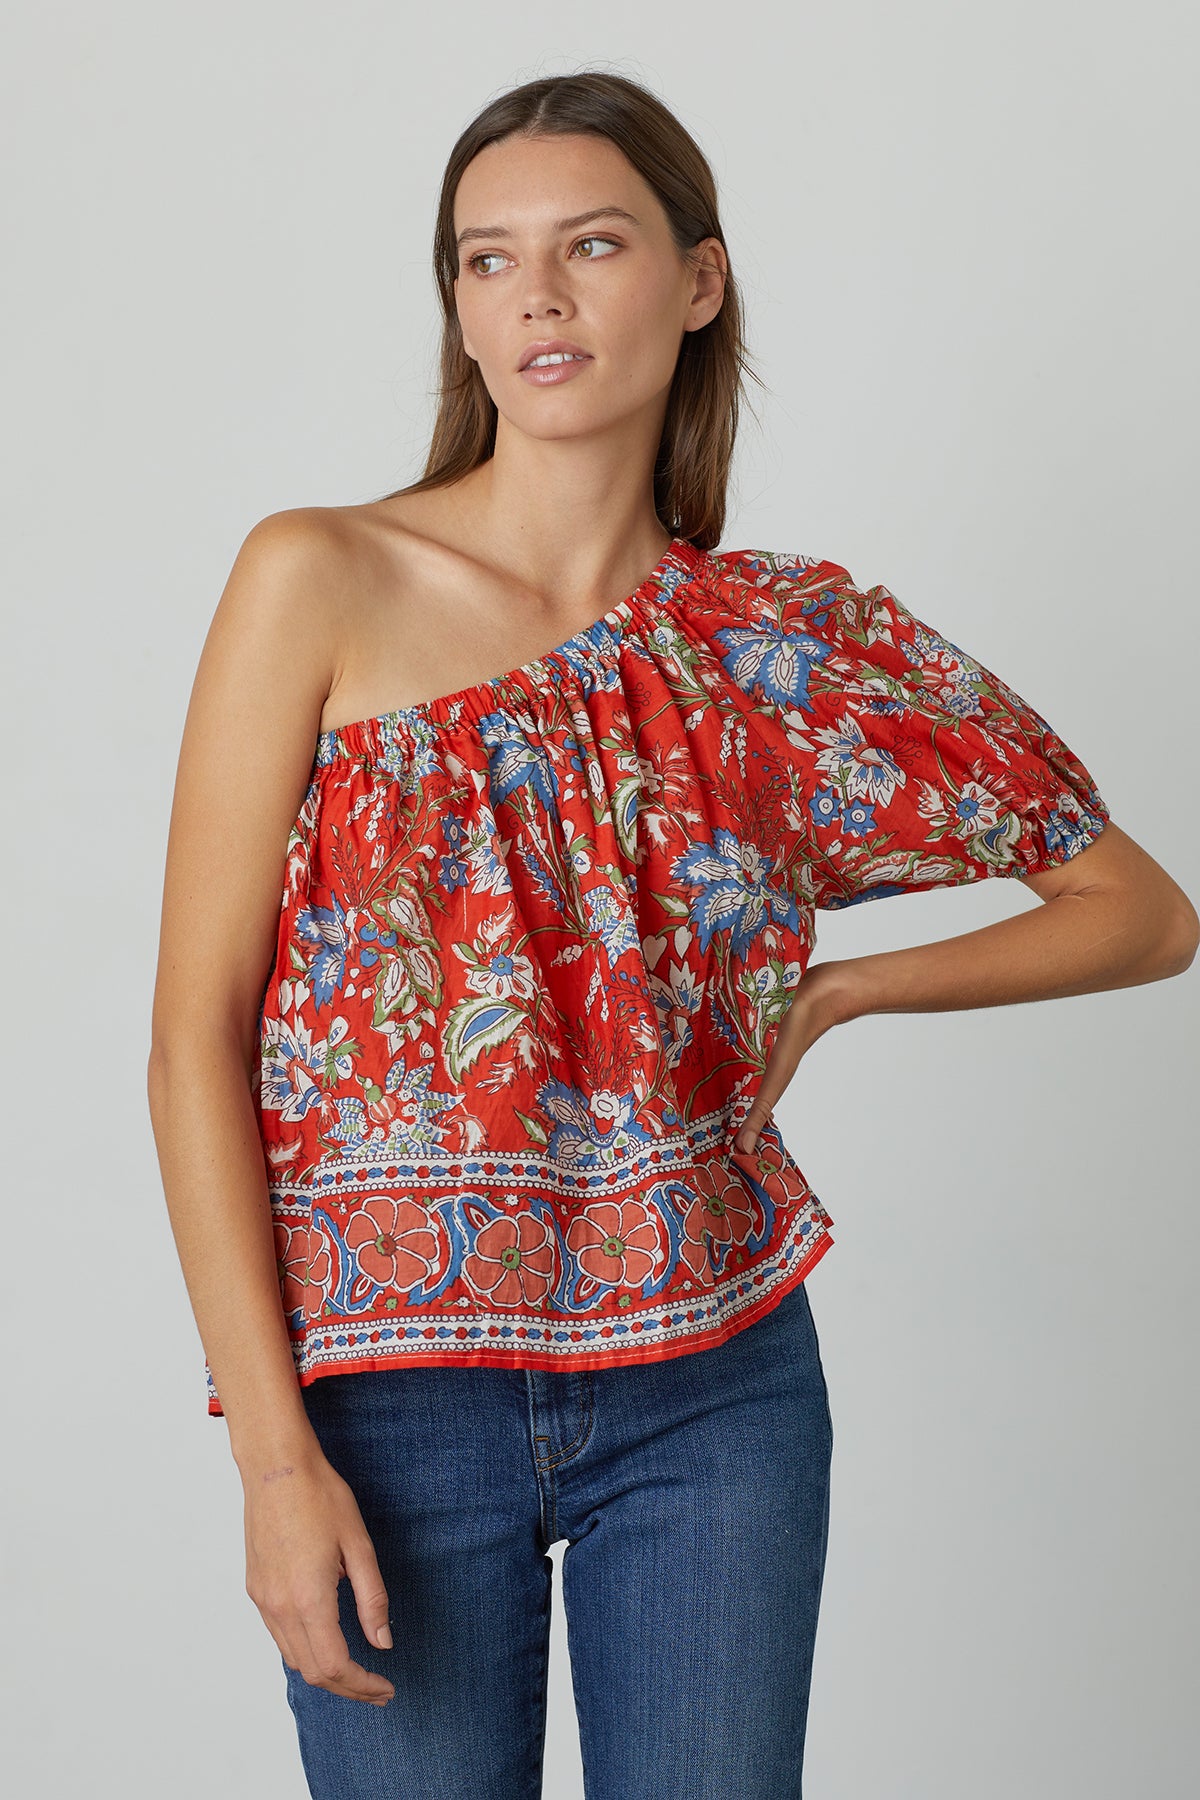 diana top rouge front-24821669429441